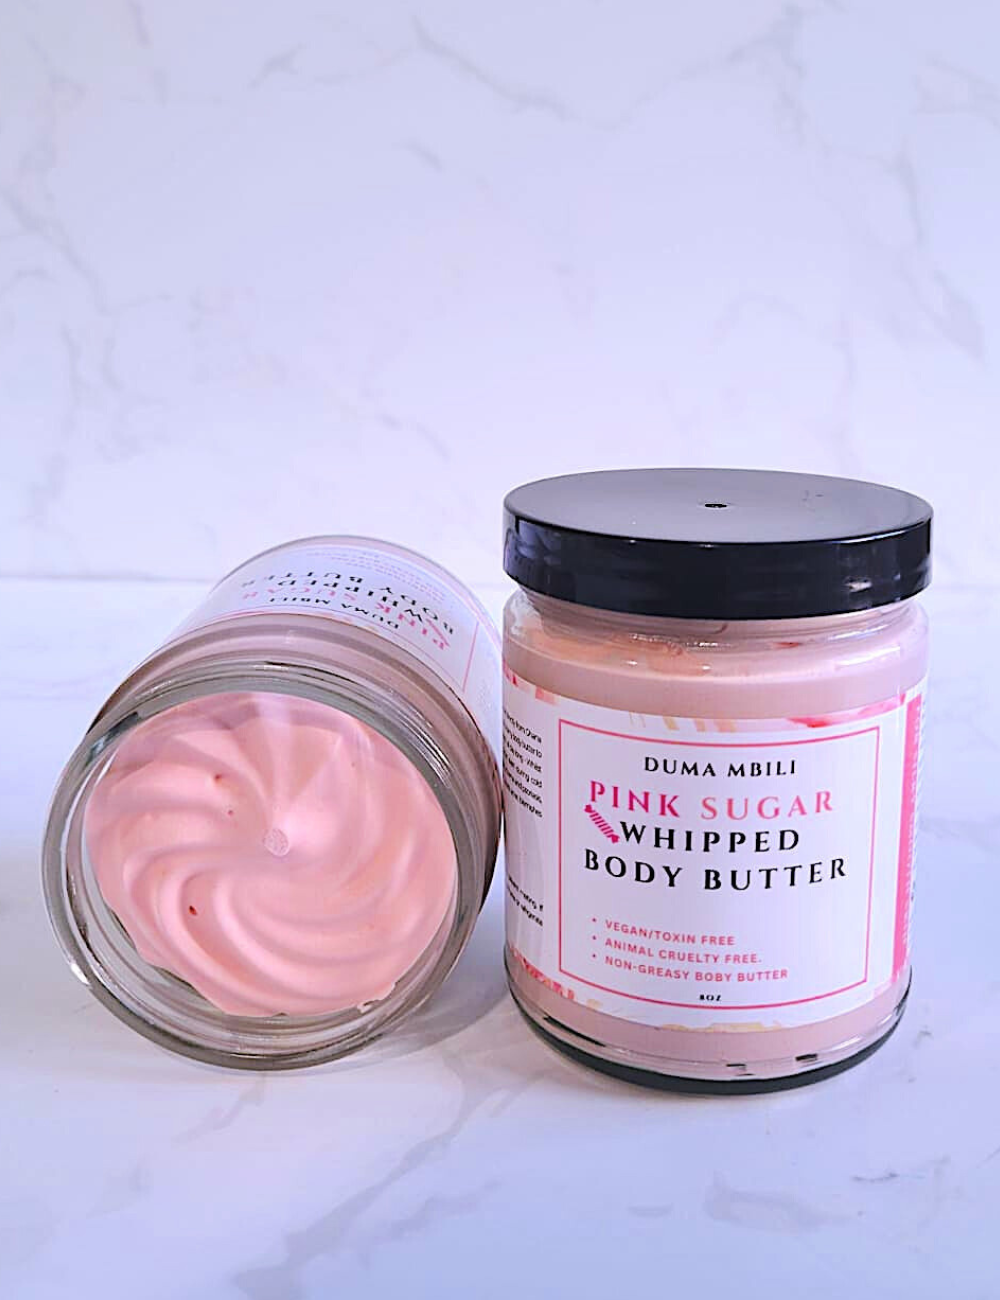 Pink Sugar Body Butter – Pousse & Co.